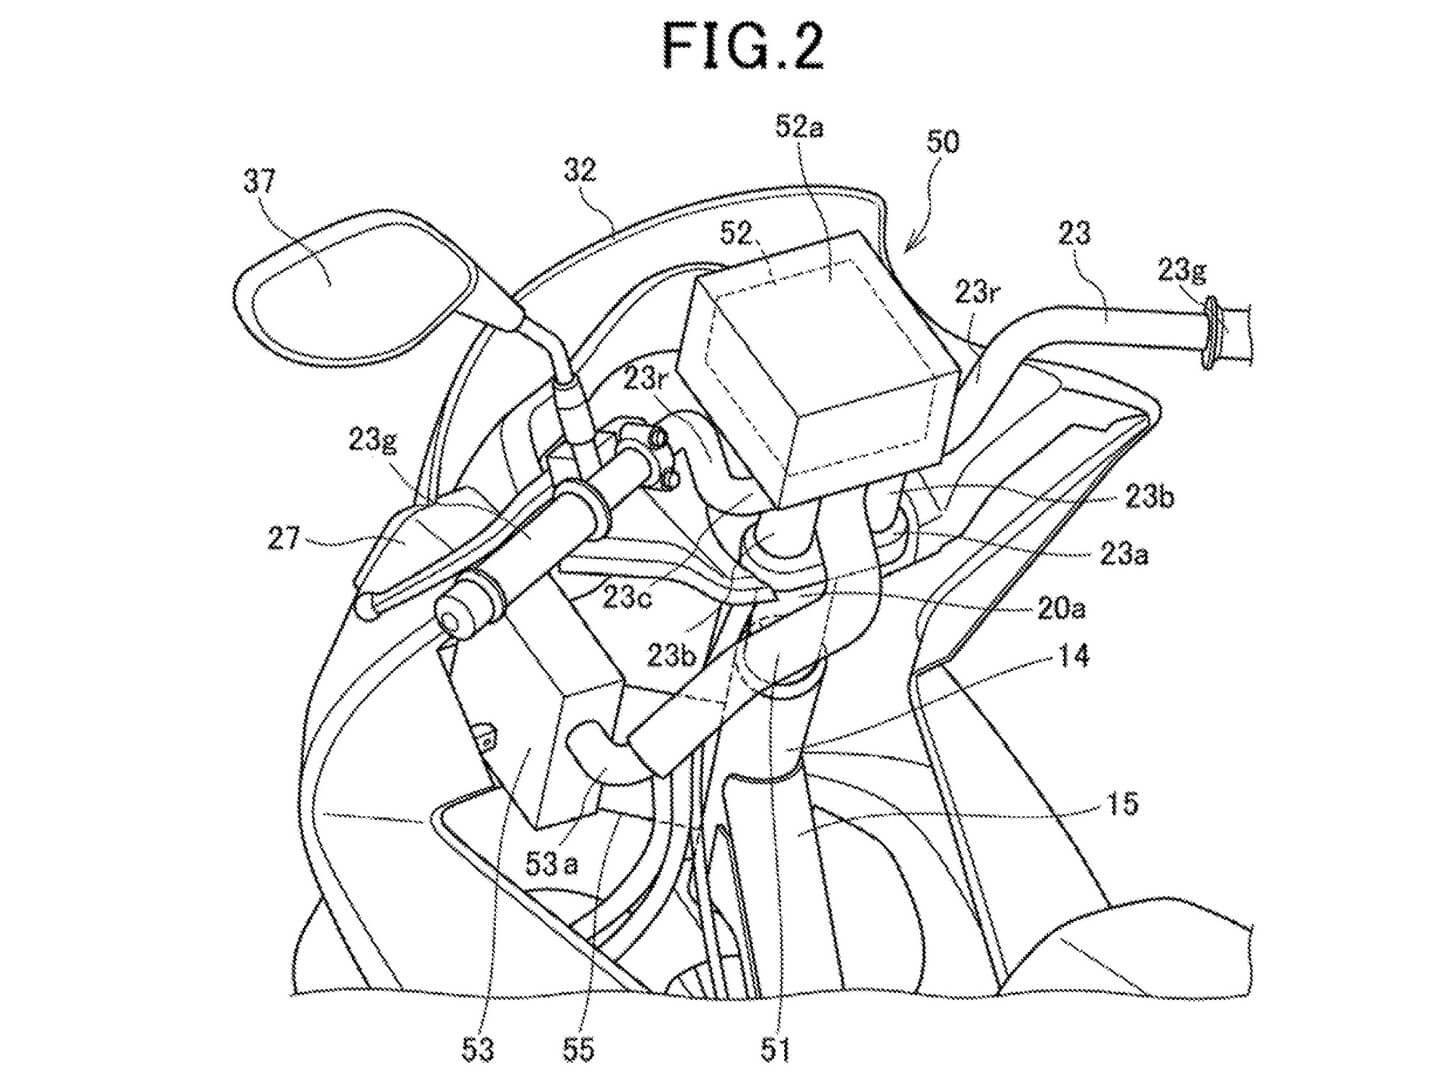 New 2023 Honda Motorcycle / Scooter Airbag Models Releasing Soon? New Patent Documents Filed...